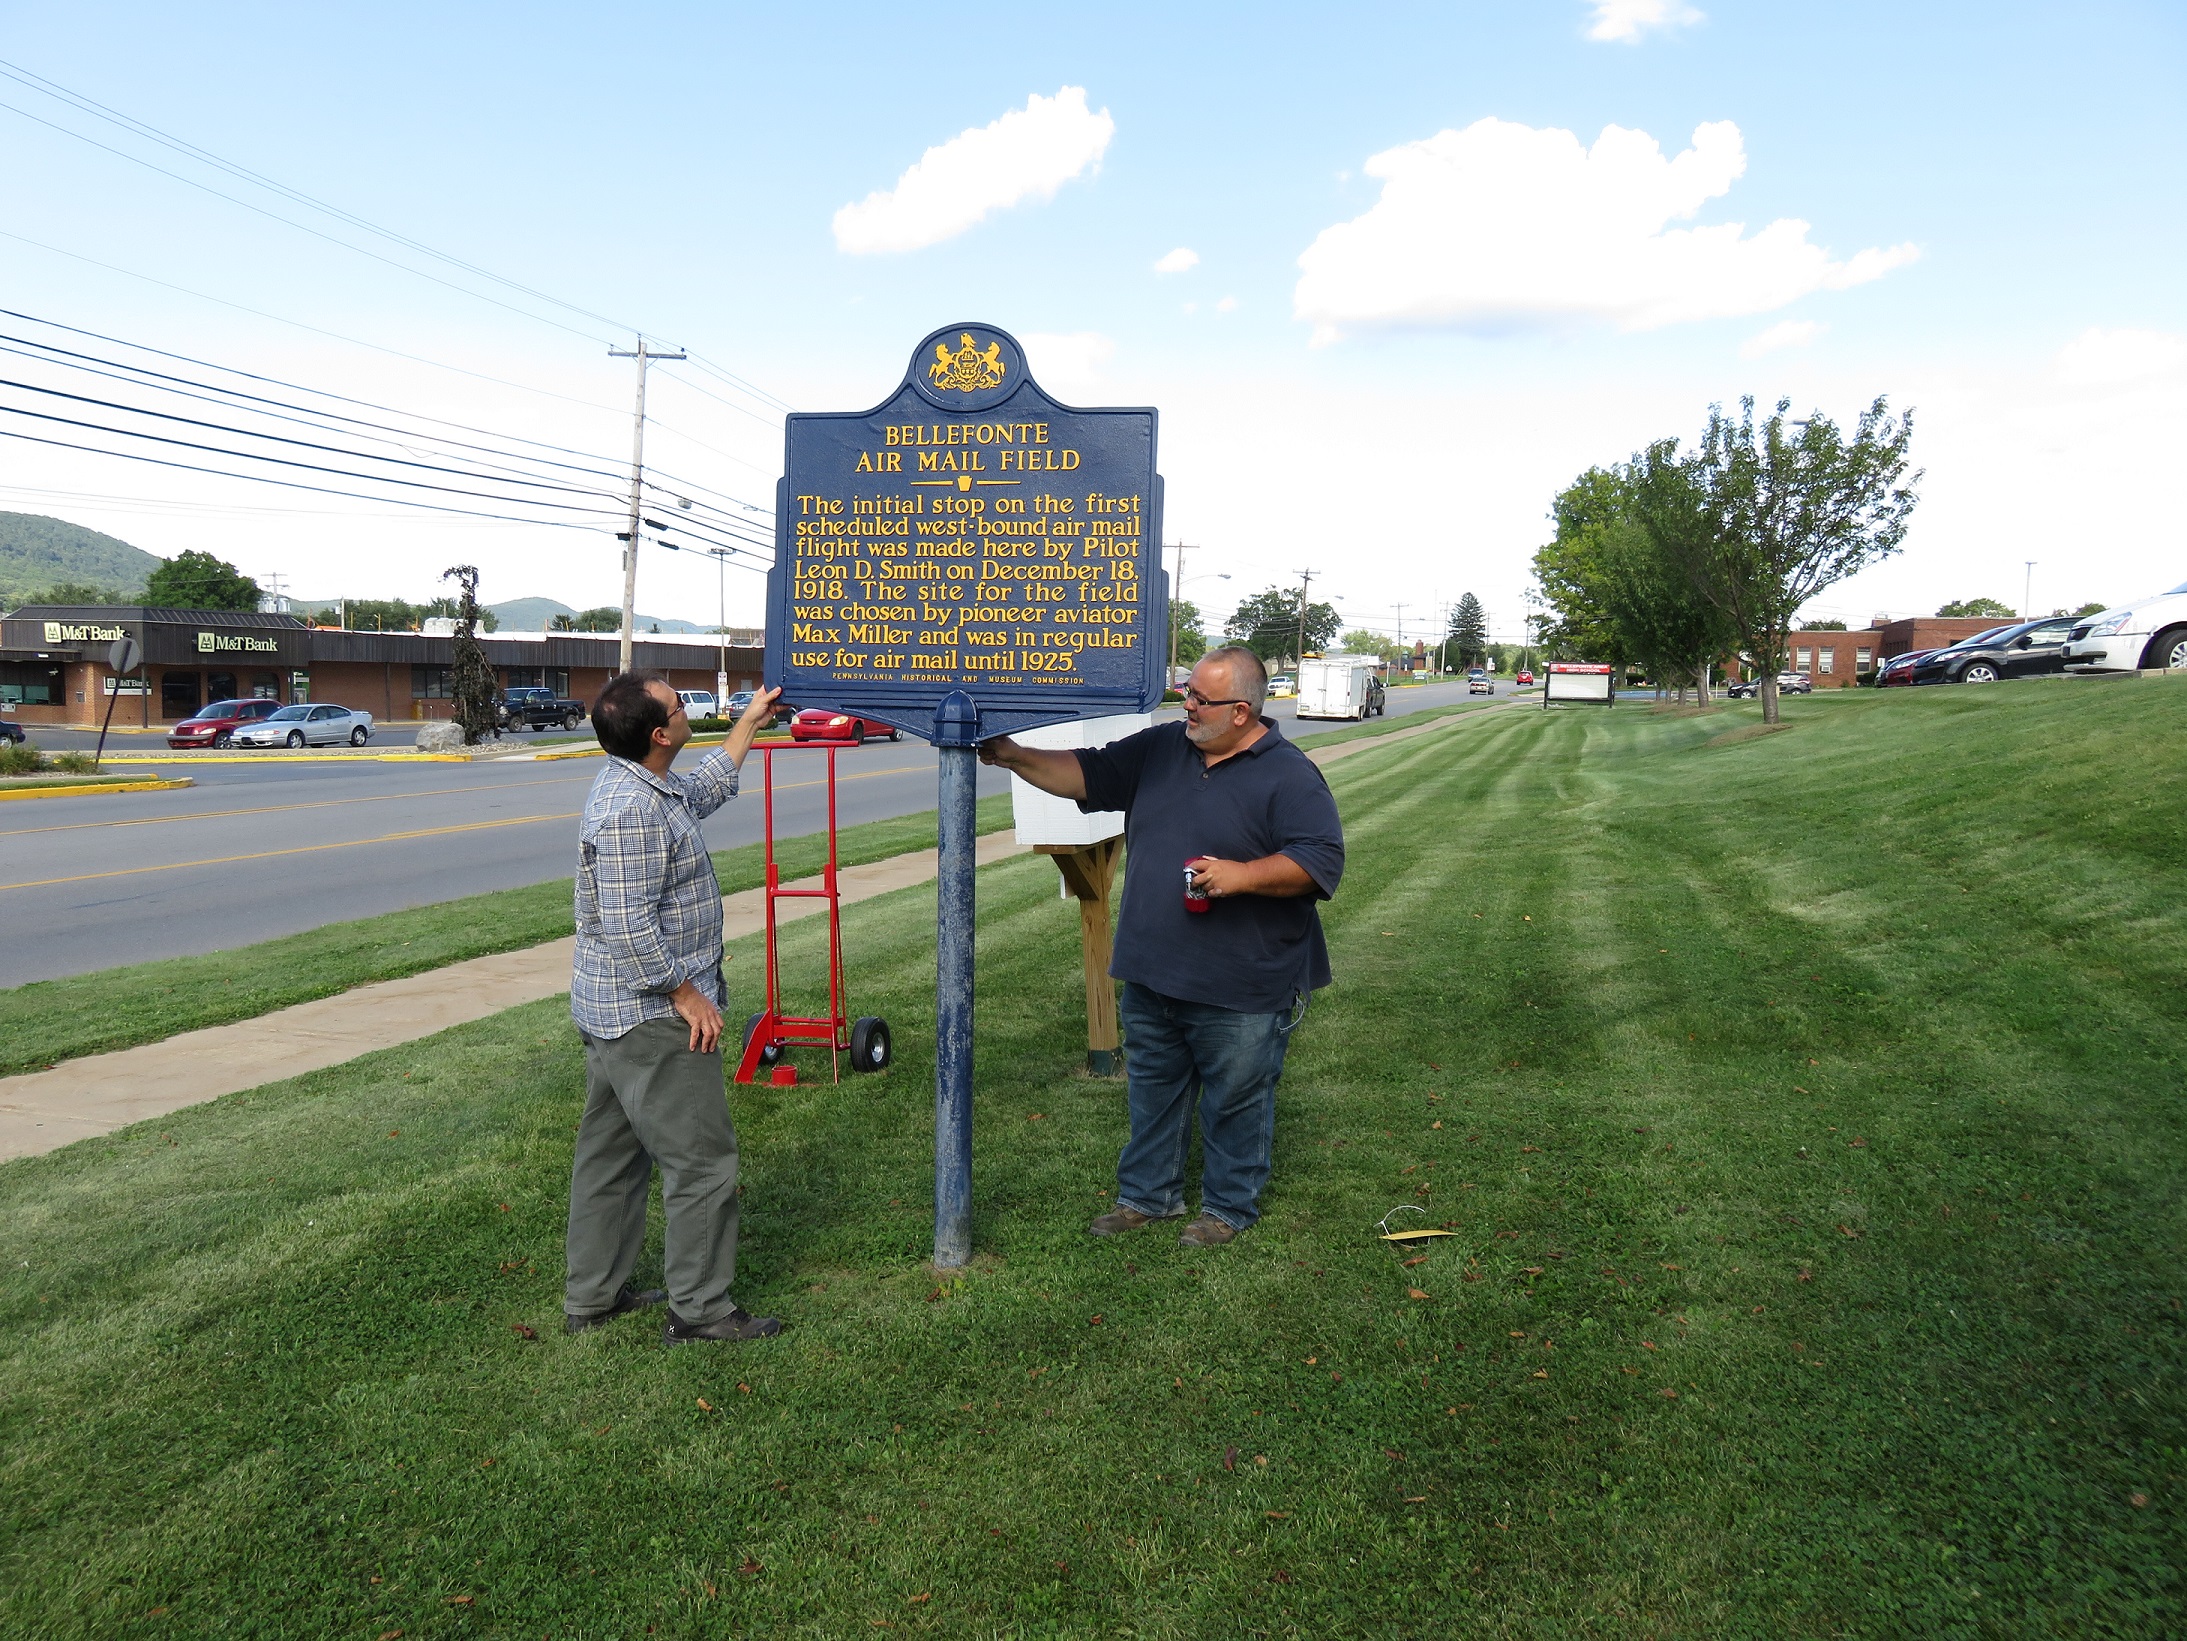 This image shows two men standing on a lawn holding a large blue and gold PA historical marker.